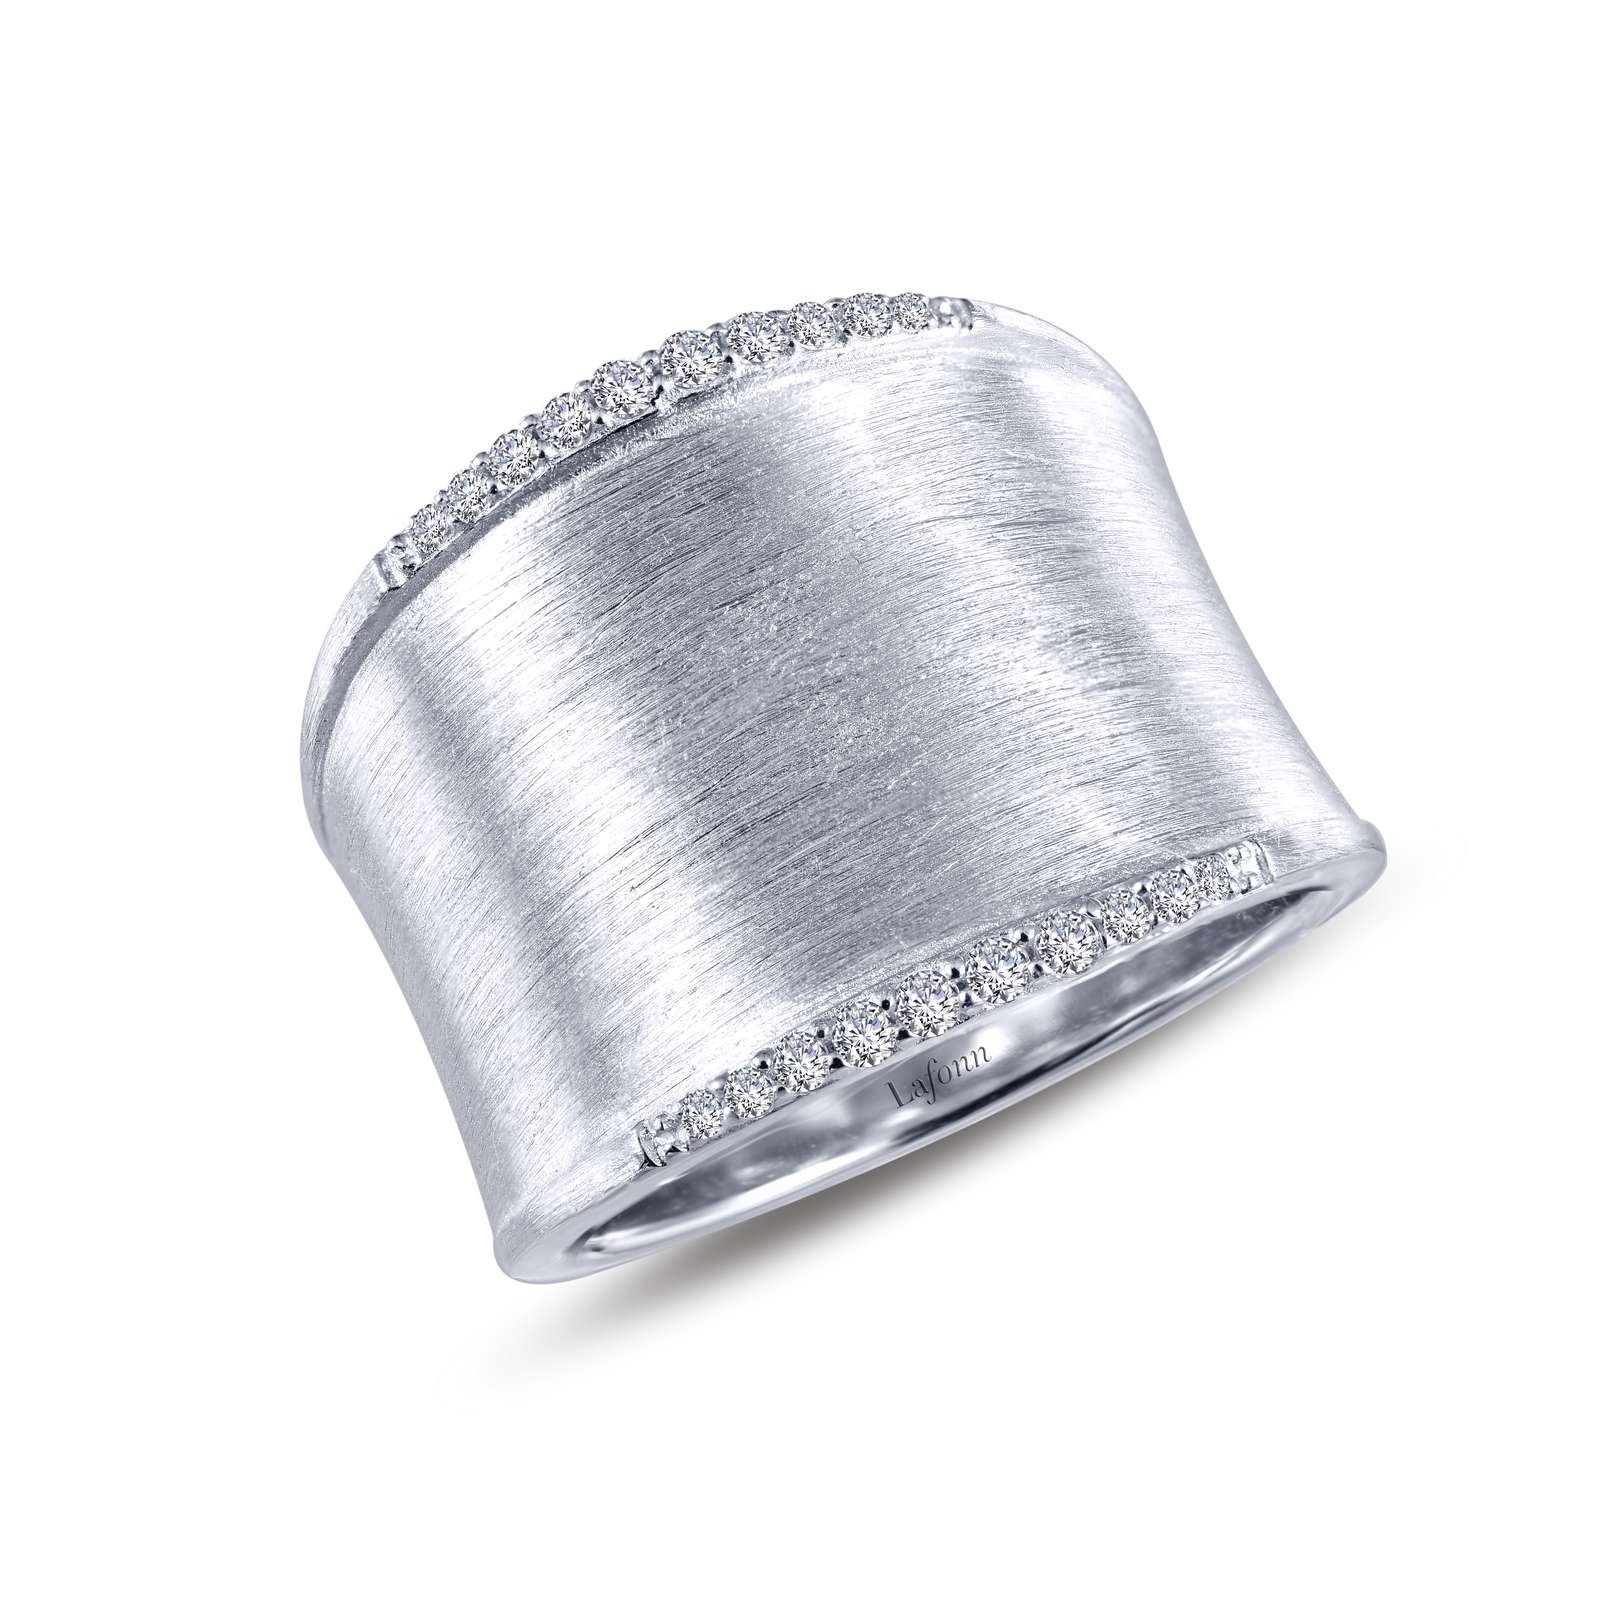 Sleek Wide Band Cuff Ring Griner Jewelry Co. Moultrie, GA